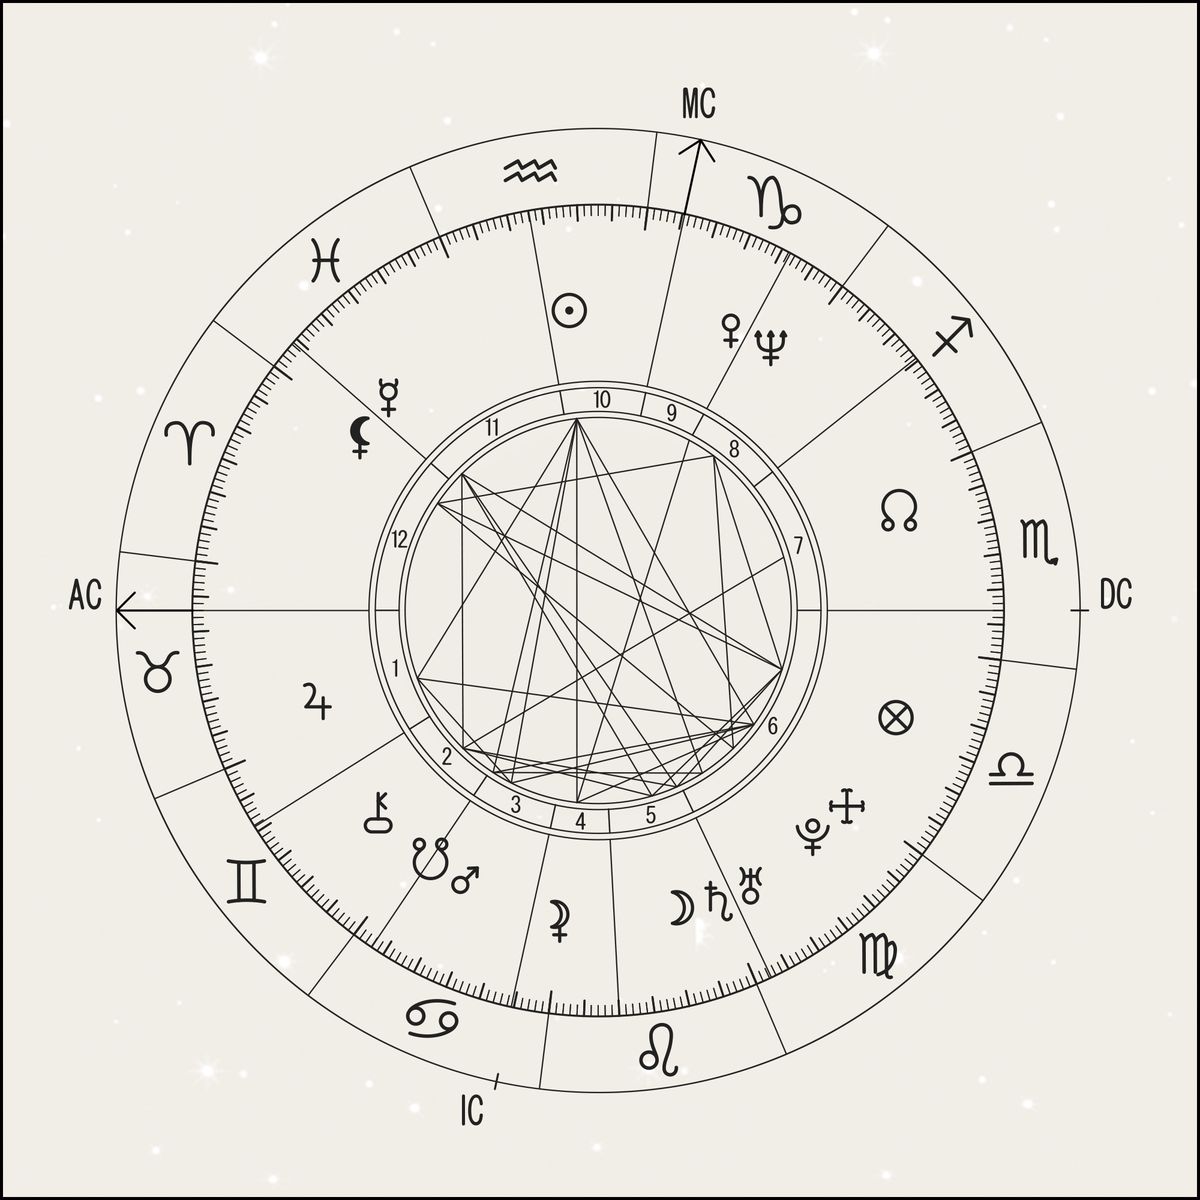 Birth Charts 101: Understanding the Planets and Their Meanings